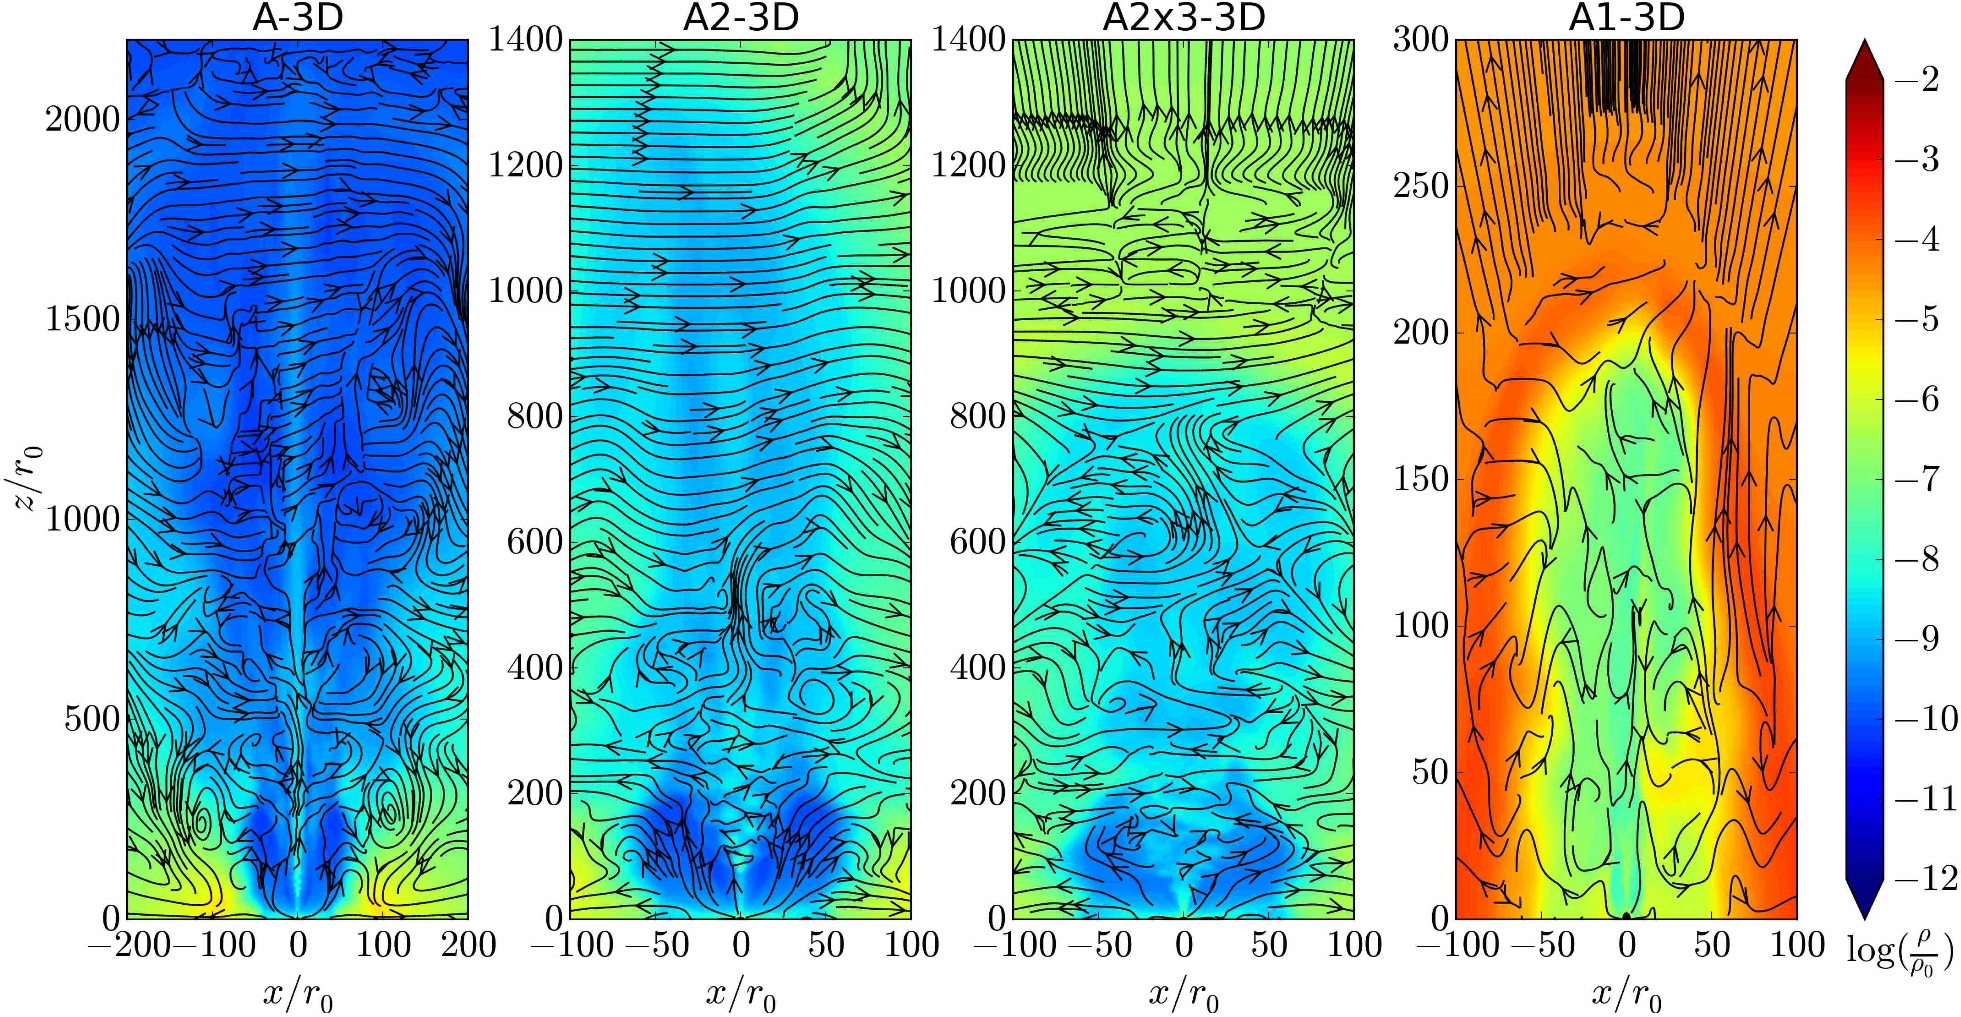 Image - Side-by-side comparison of density “snapshots” produced in a 3-D simulation of jets beaming out from a black hole (at the base of images). Red shows higher density and blue shows lower density. The black directional lines show magnetic field streamlines. The perturbed magnetic lines reflect both the emergence of irregular magnetic fields in the jets and the large-scale deviations of the jets out of the image plane, both caused by the 3D magnetic kink instability. (Credit: Berkeley Lab, Purdue University)